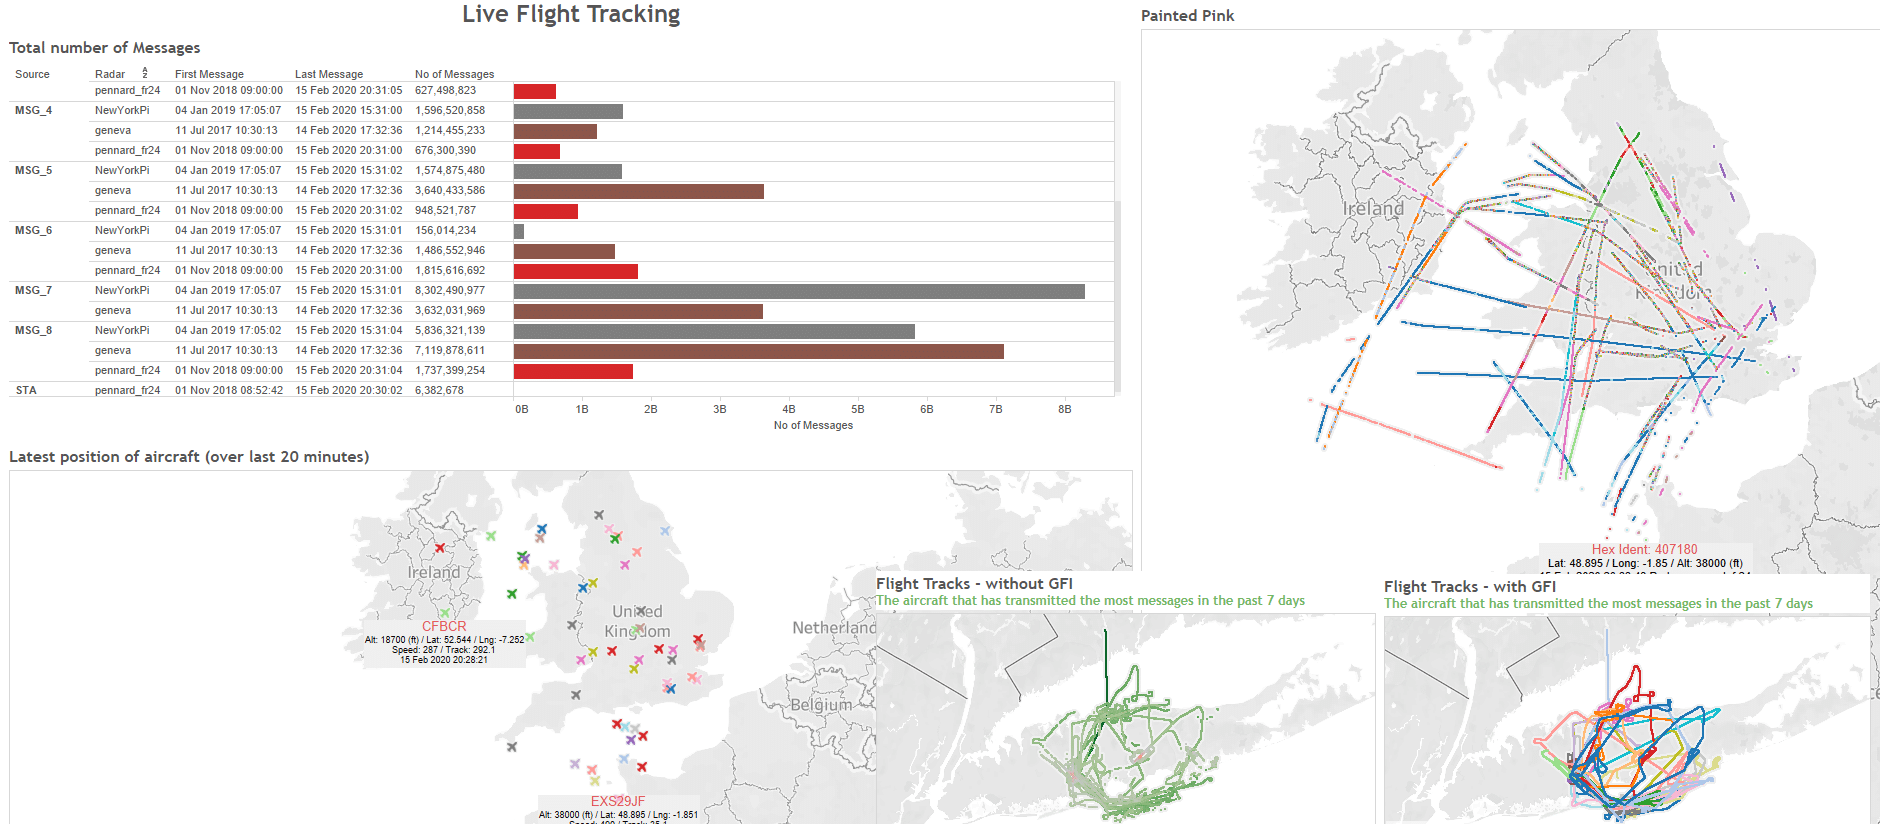 Live flight tracking visualizations in Tableau